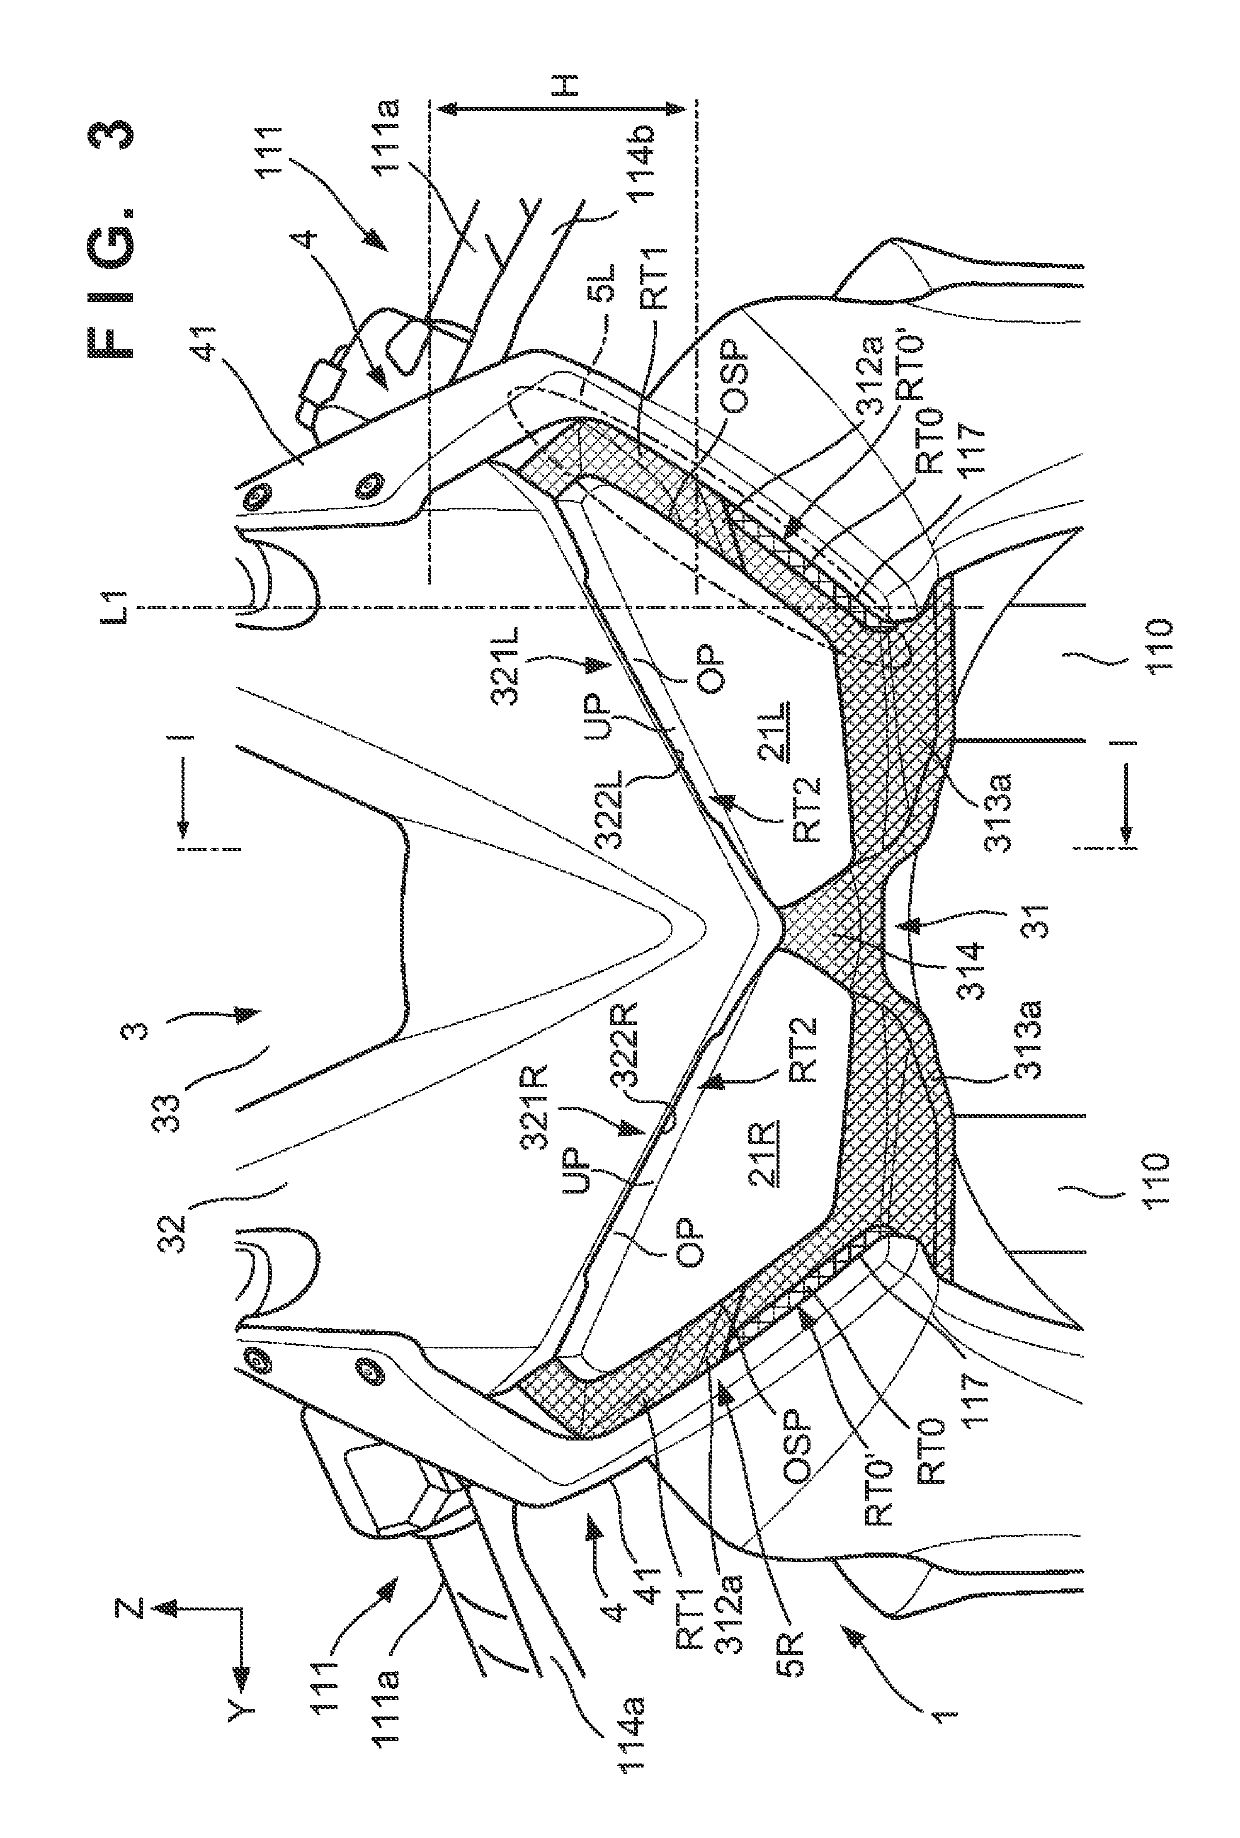 Front structure of saddle ride type vehicle